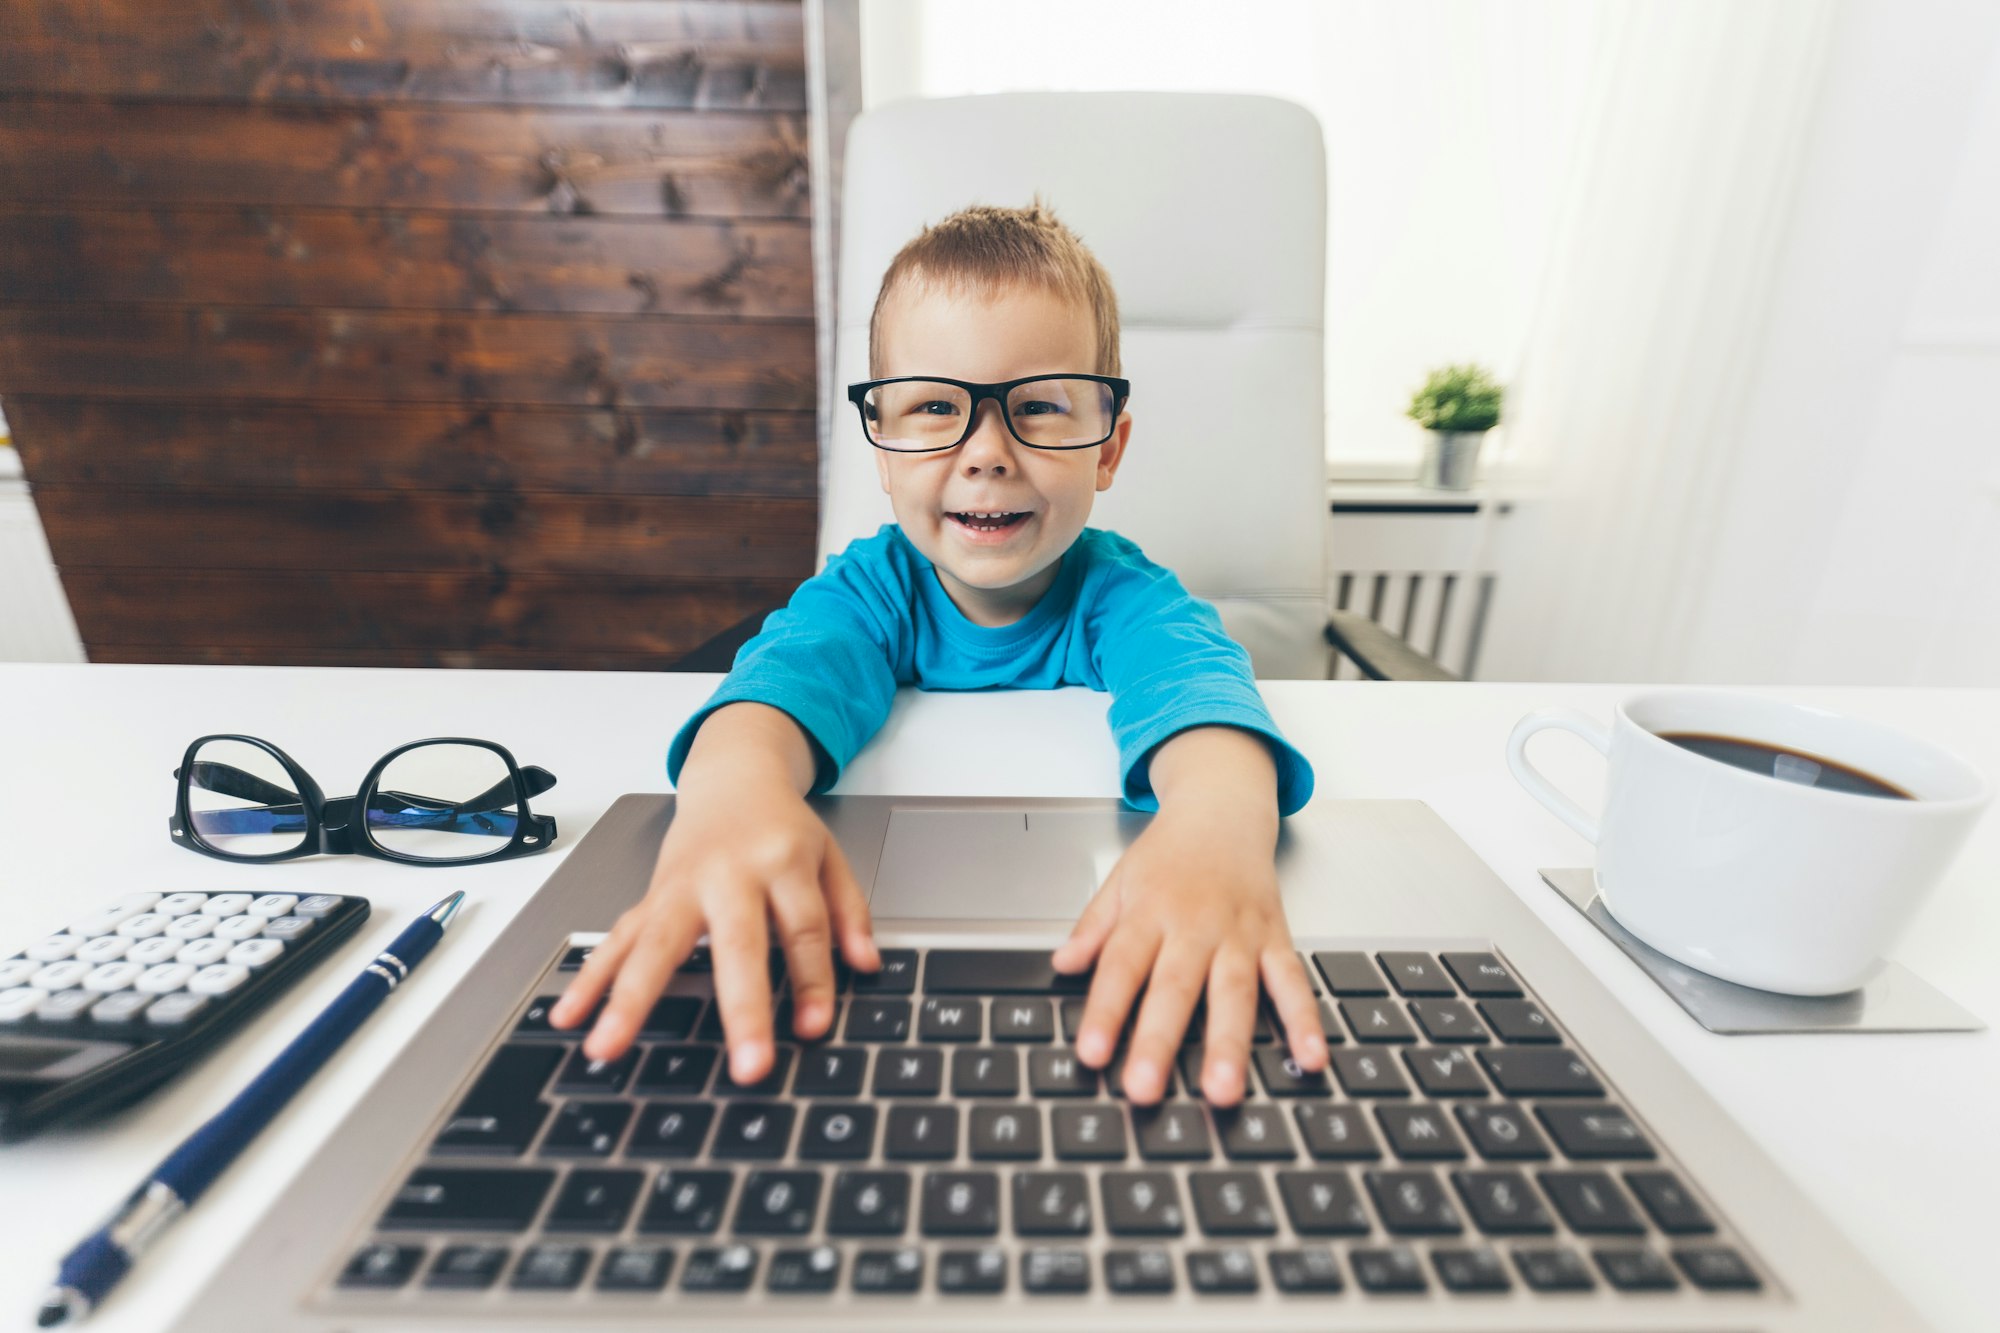 Cute child with glasses using a laptop